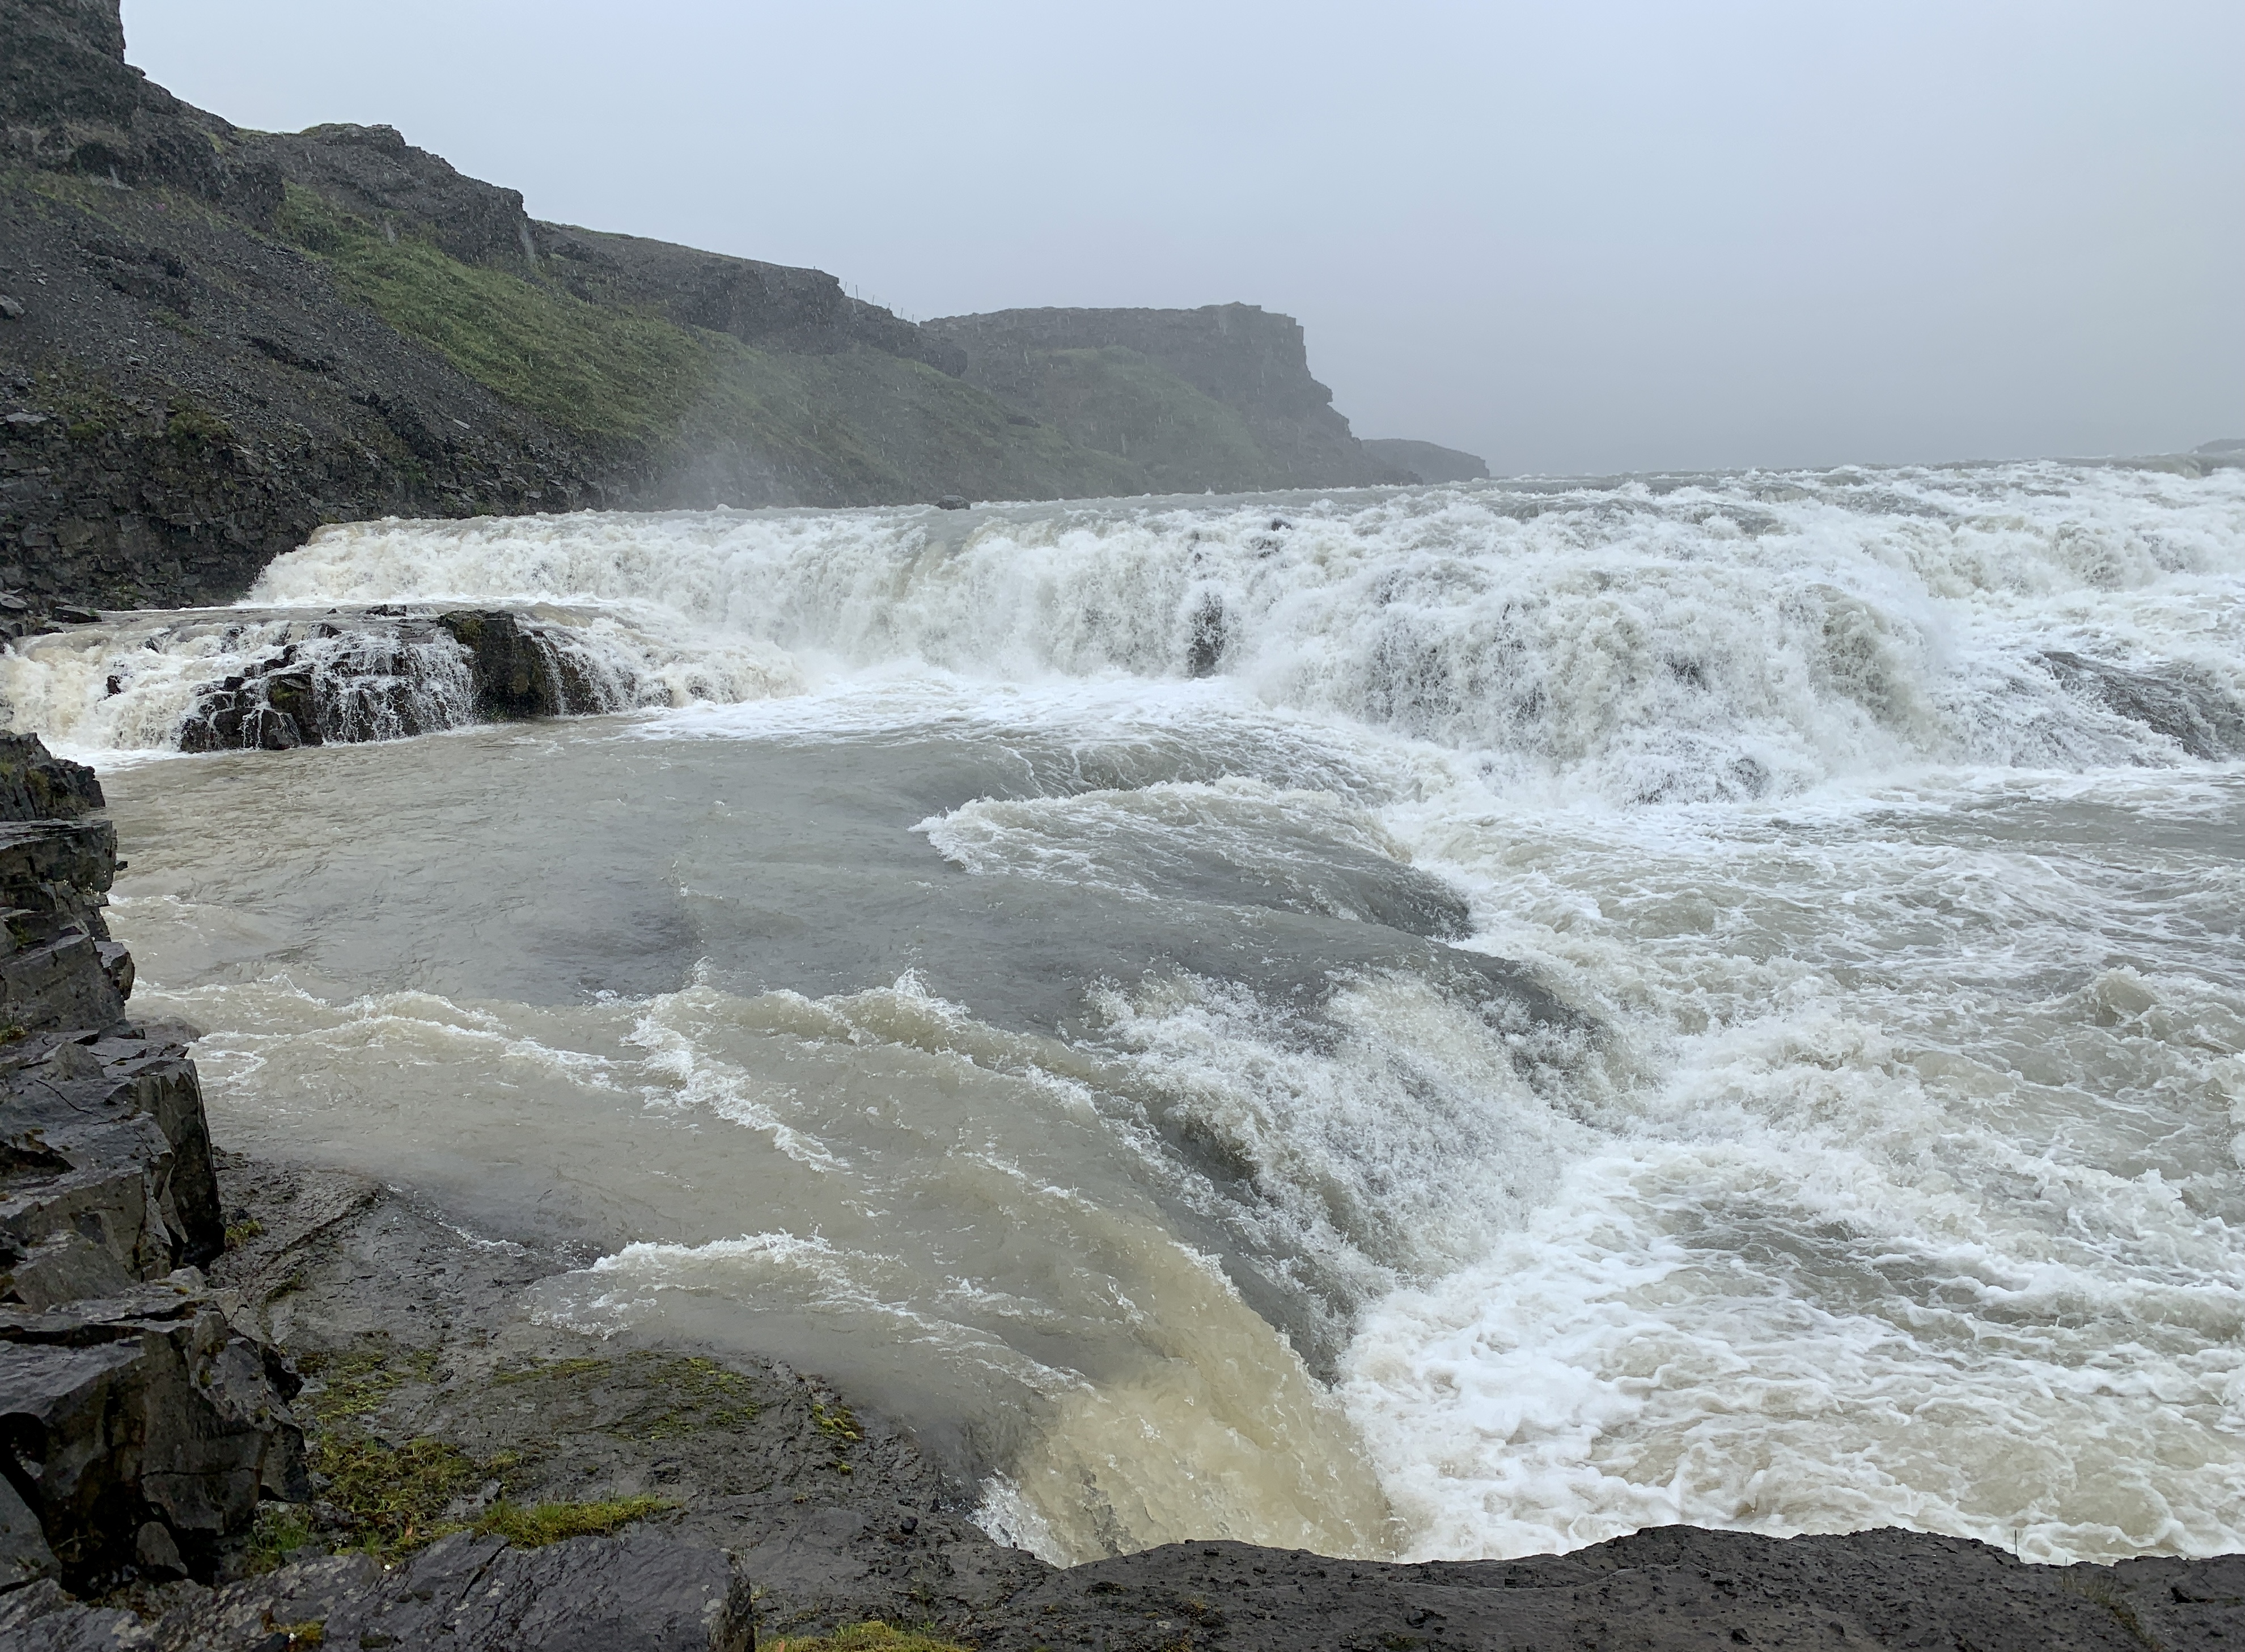 Top portion of Gullfoss Waterfall in Iceland